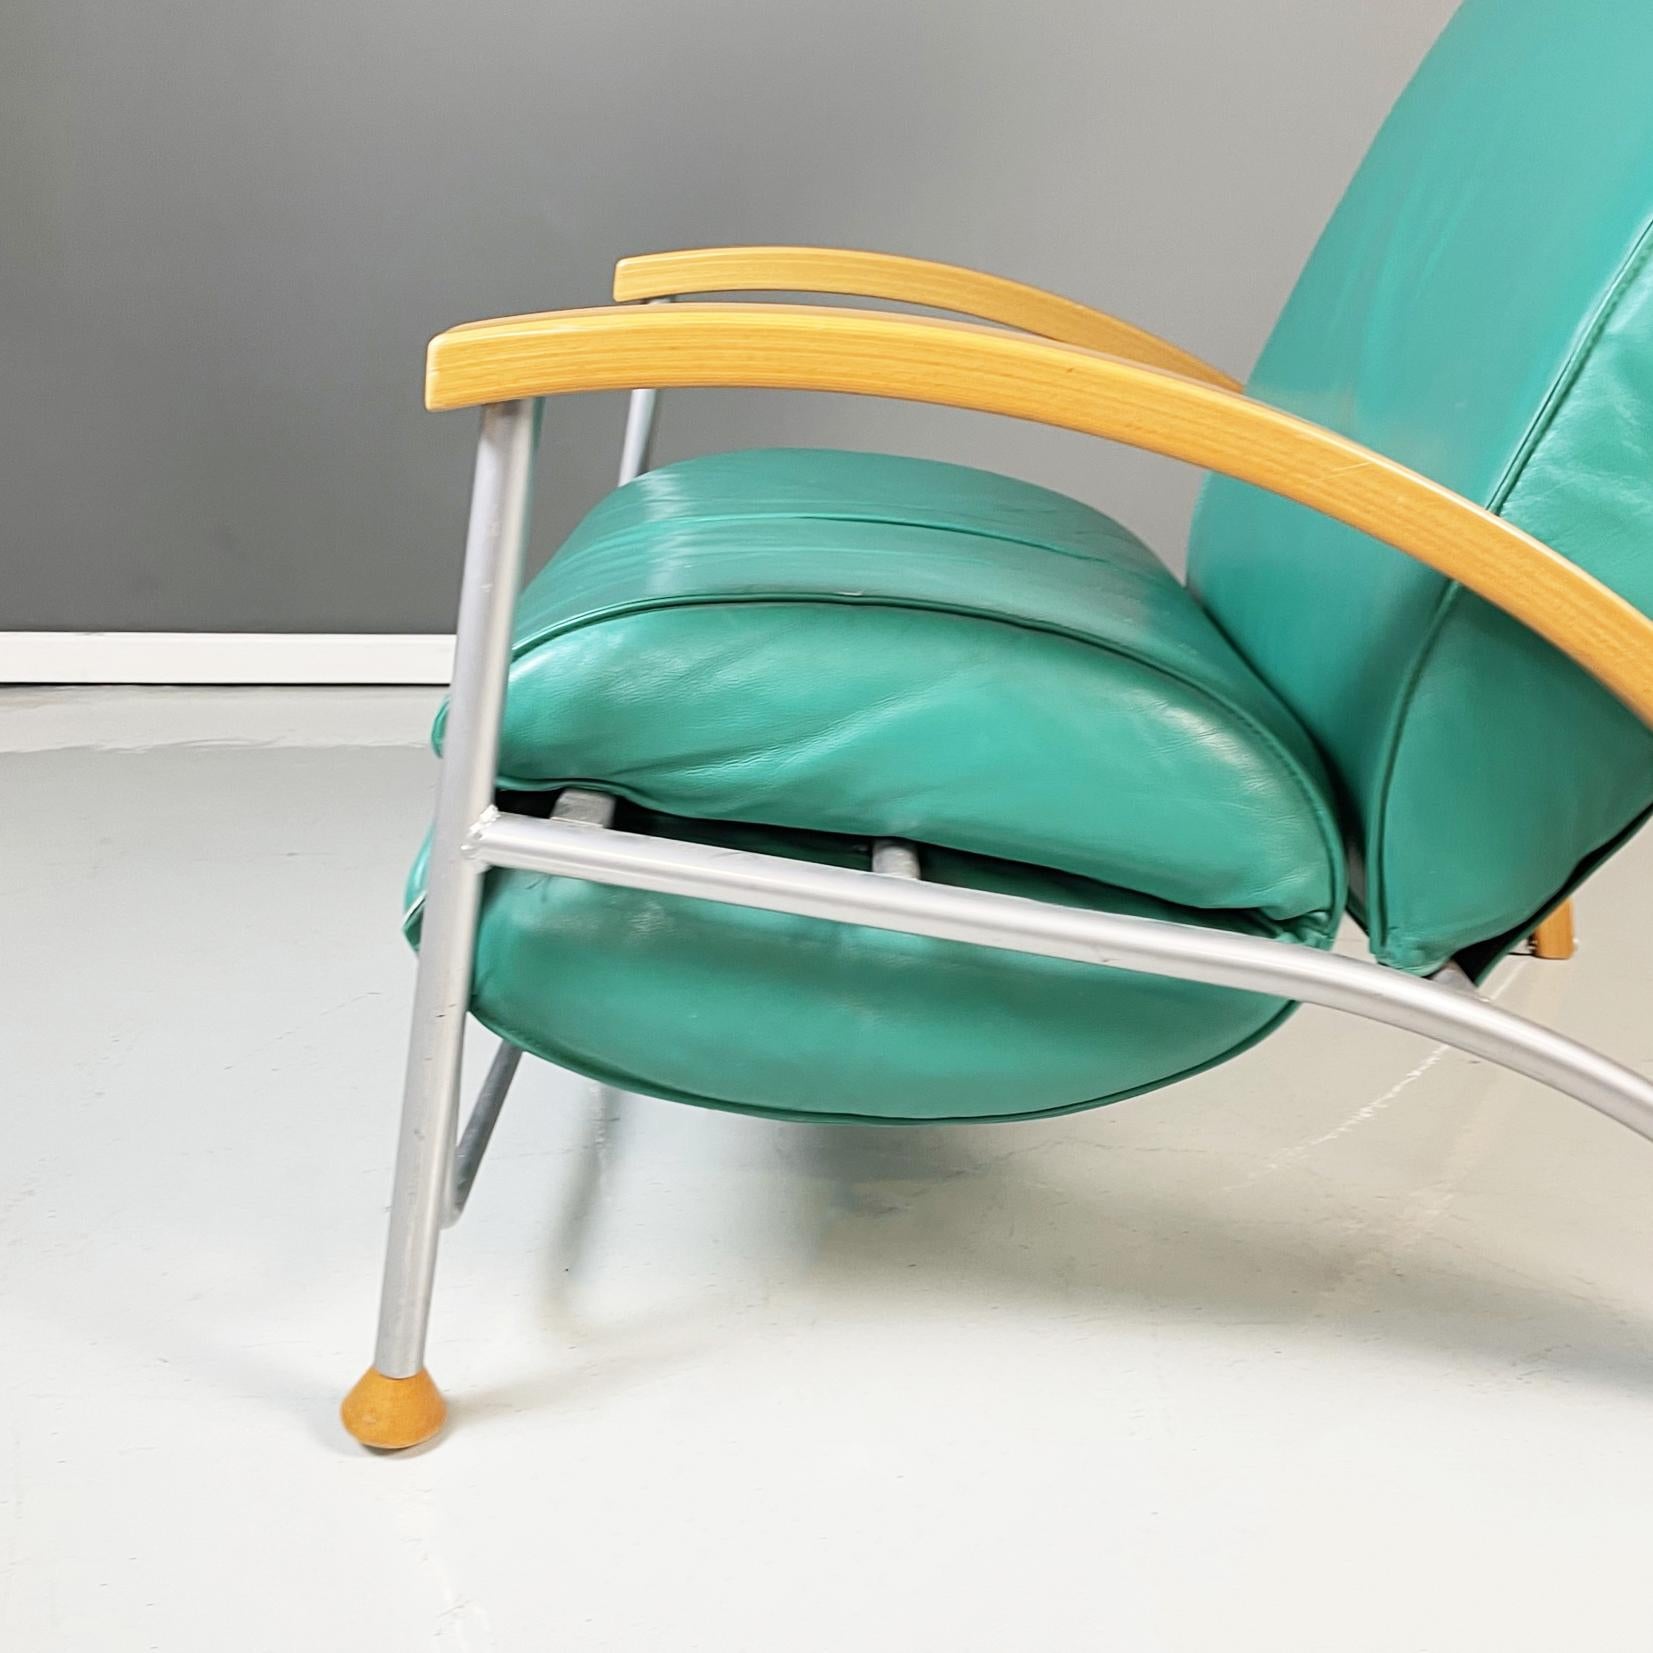 Italian Modern Armchair in Aqua-Green Leather, Wood and Metal, 1980s For Sale 8